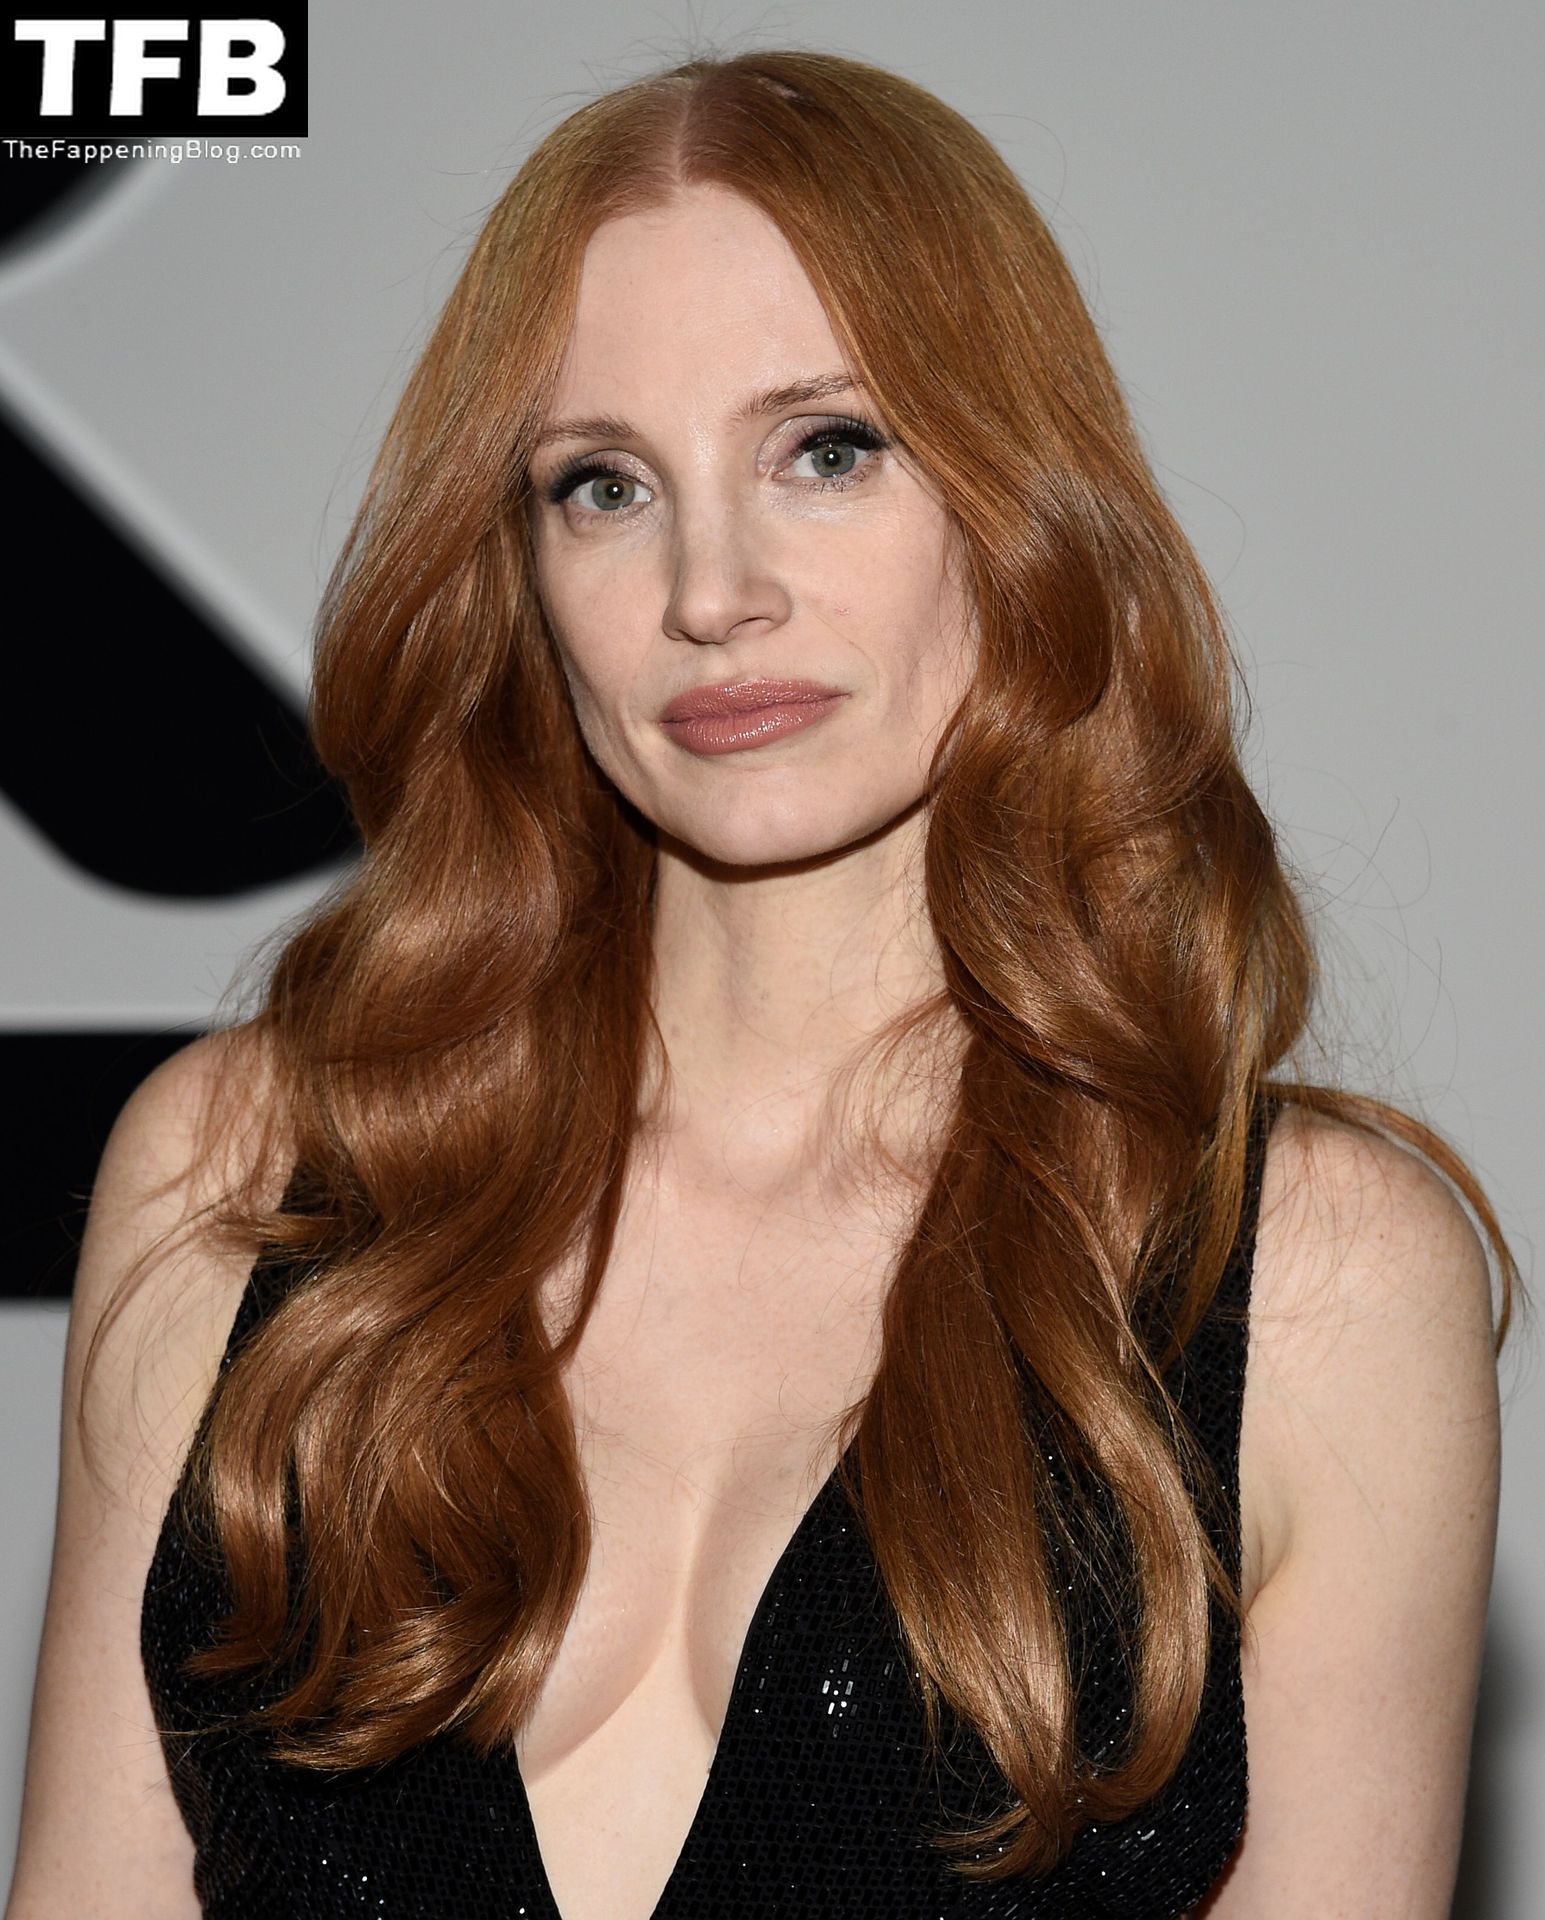 Jessica-Chastain-Sexy-The-Fappening-Blog-58.jpg